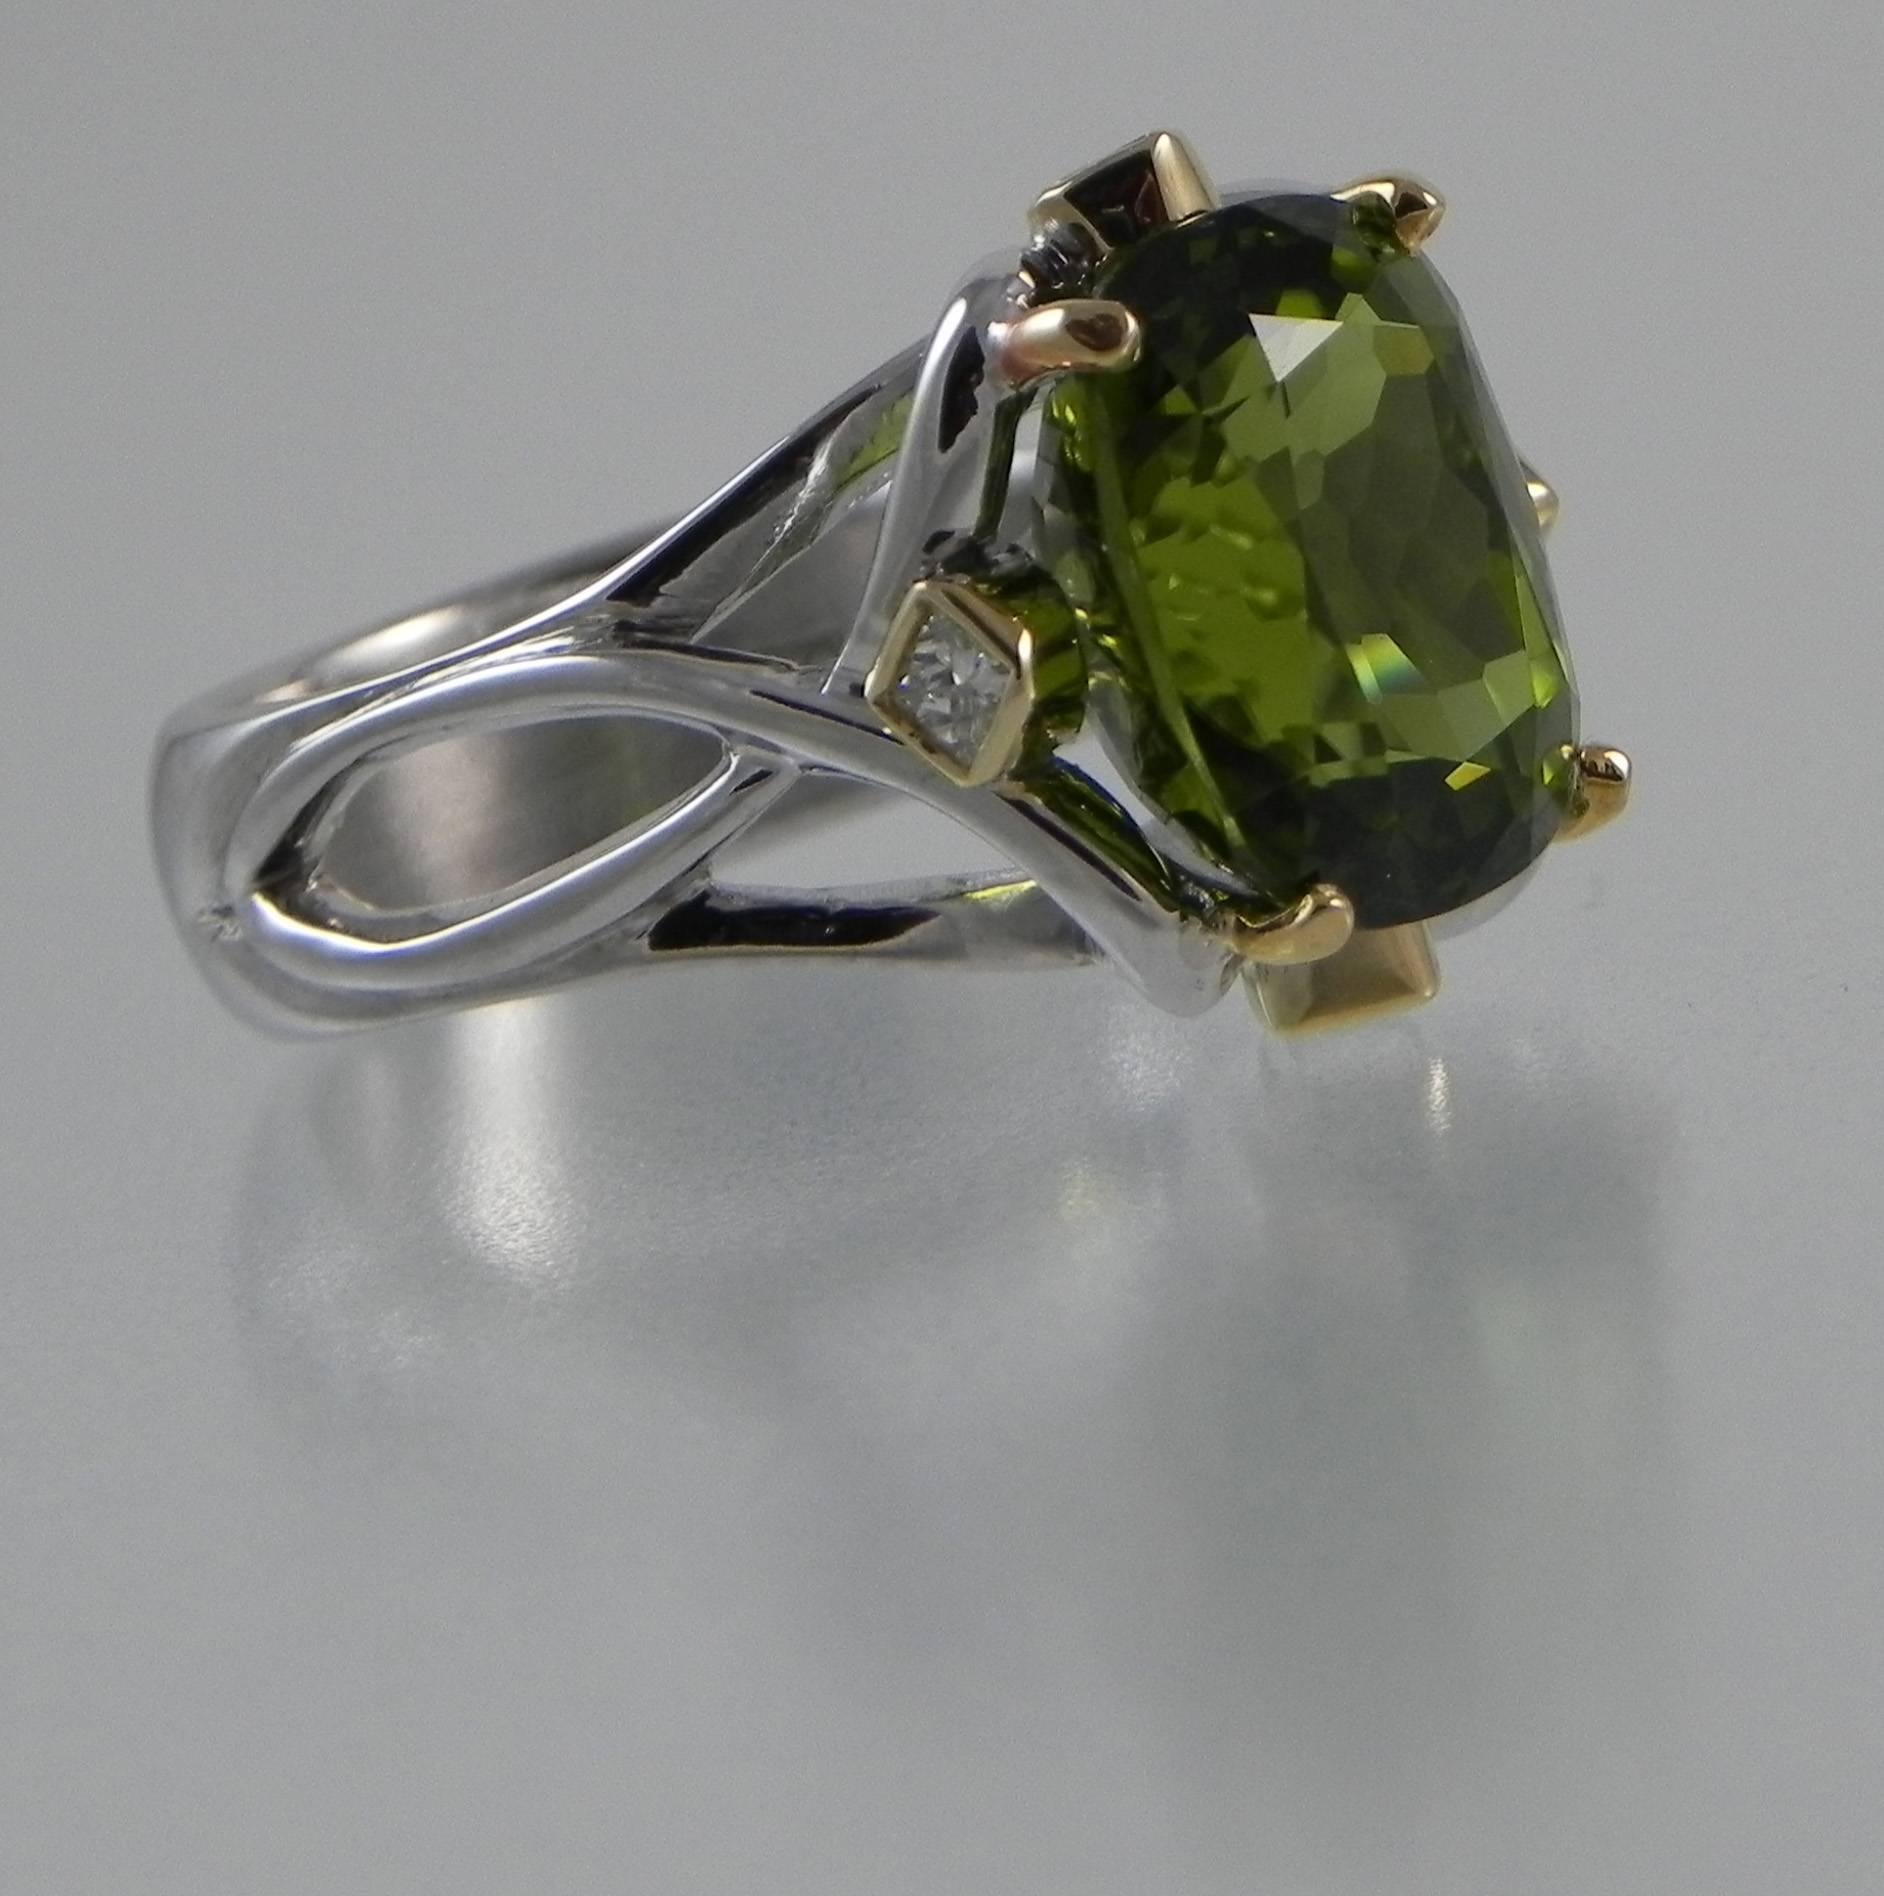 One-of-a-kind and handmade ring by Colorado’s Premier Jewelry Design Studio and Master Craftsman – Steven M. Parks.  A volcano did indeed grant us with the gift of this fine gem quality Burmese Peridot. Our master craftsman then created a work of